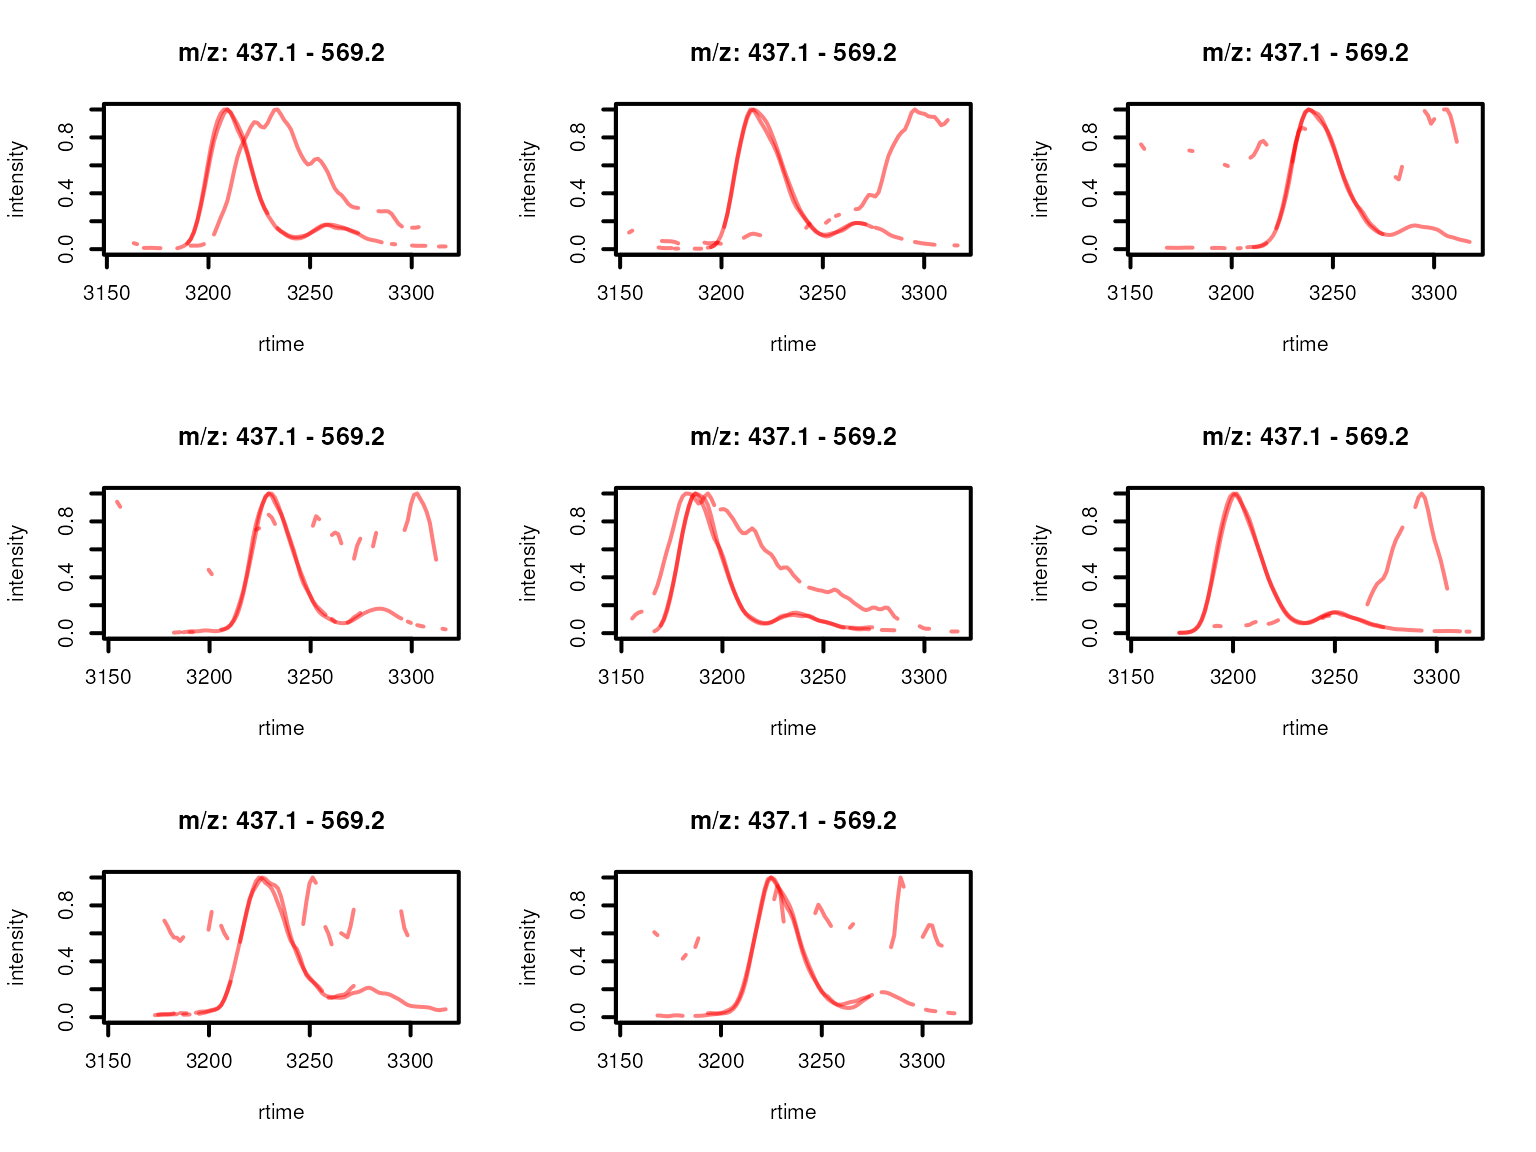 Feature EICs per sample normalized to an absolute intensity of 1 for features from a feature group defined by rentention time and feature abudances across samples. Features with high correlation of their EICs are shown in the same color.